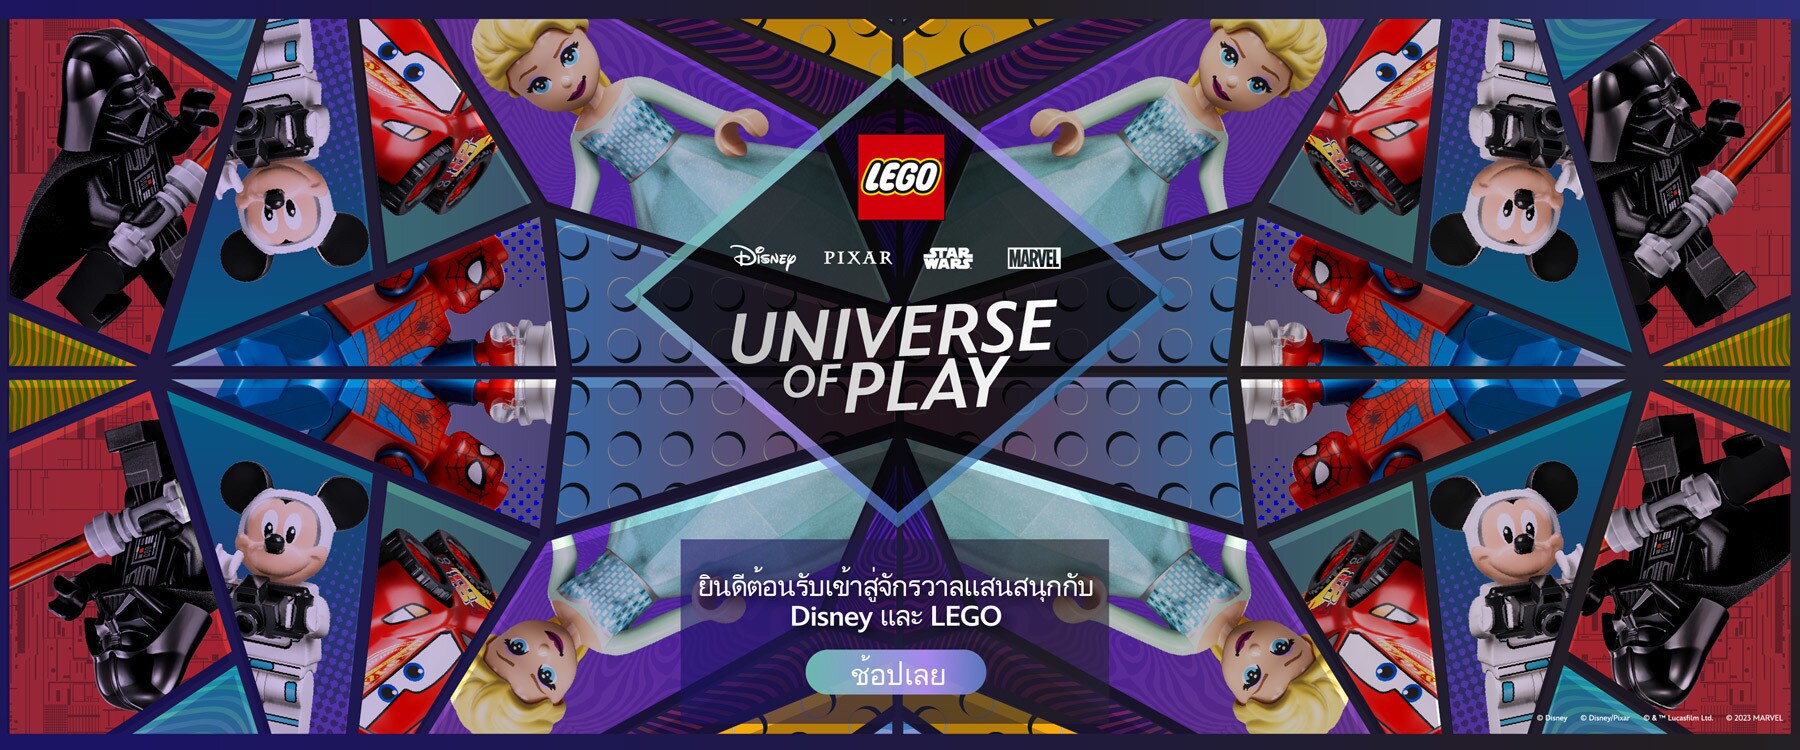 Home Page Hero - Universe of Play with Disney and LEGO